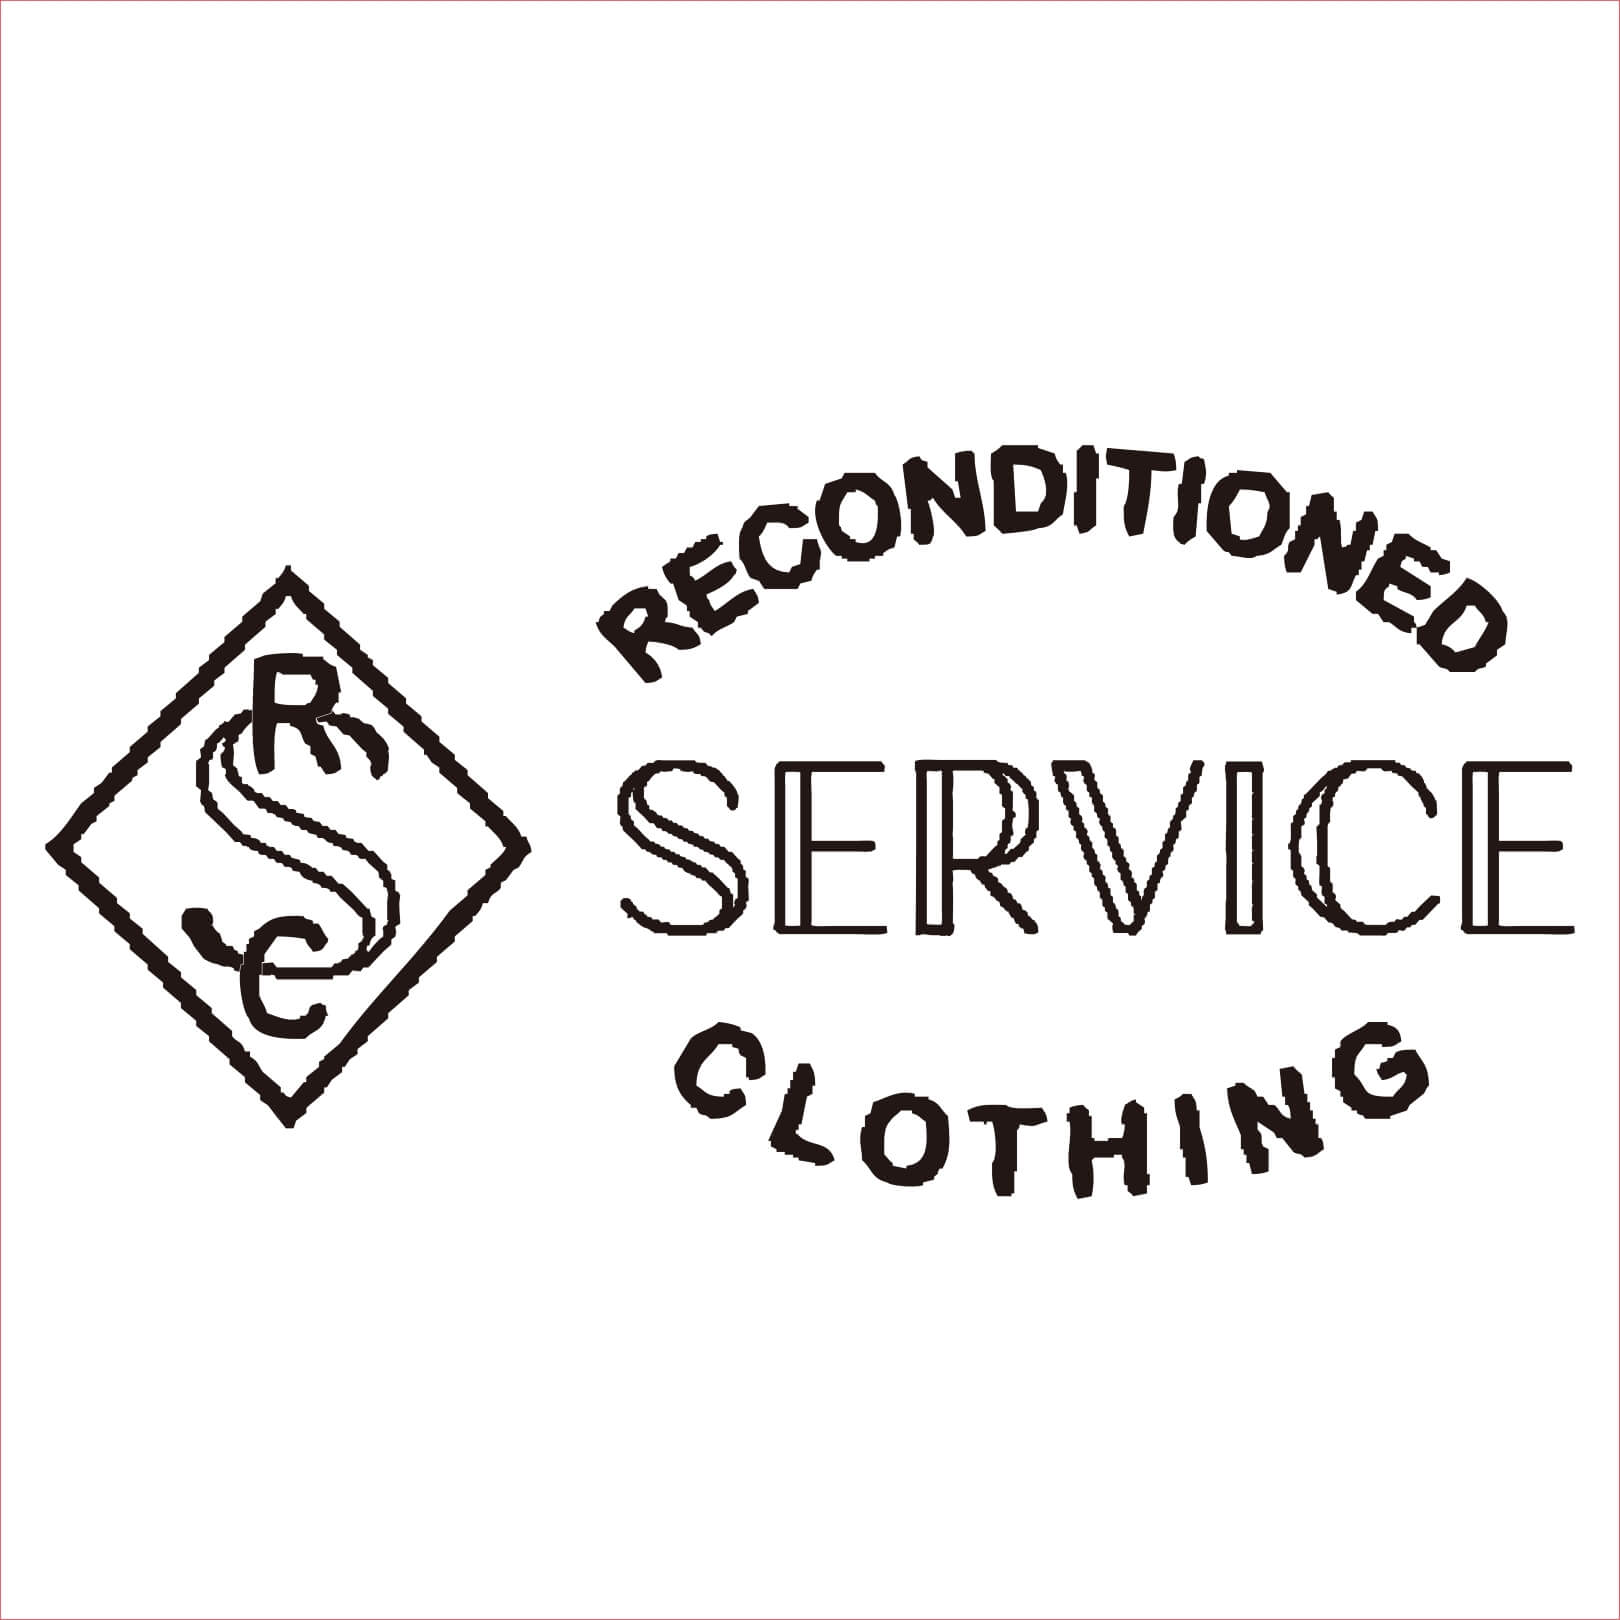 RECONDITIONED SERVICE CLOTHING